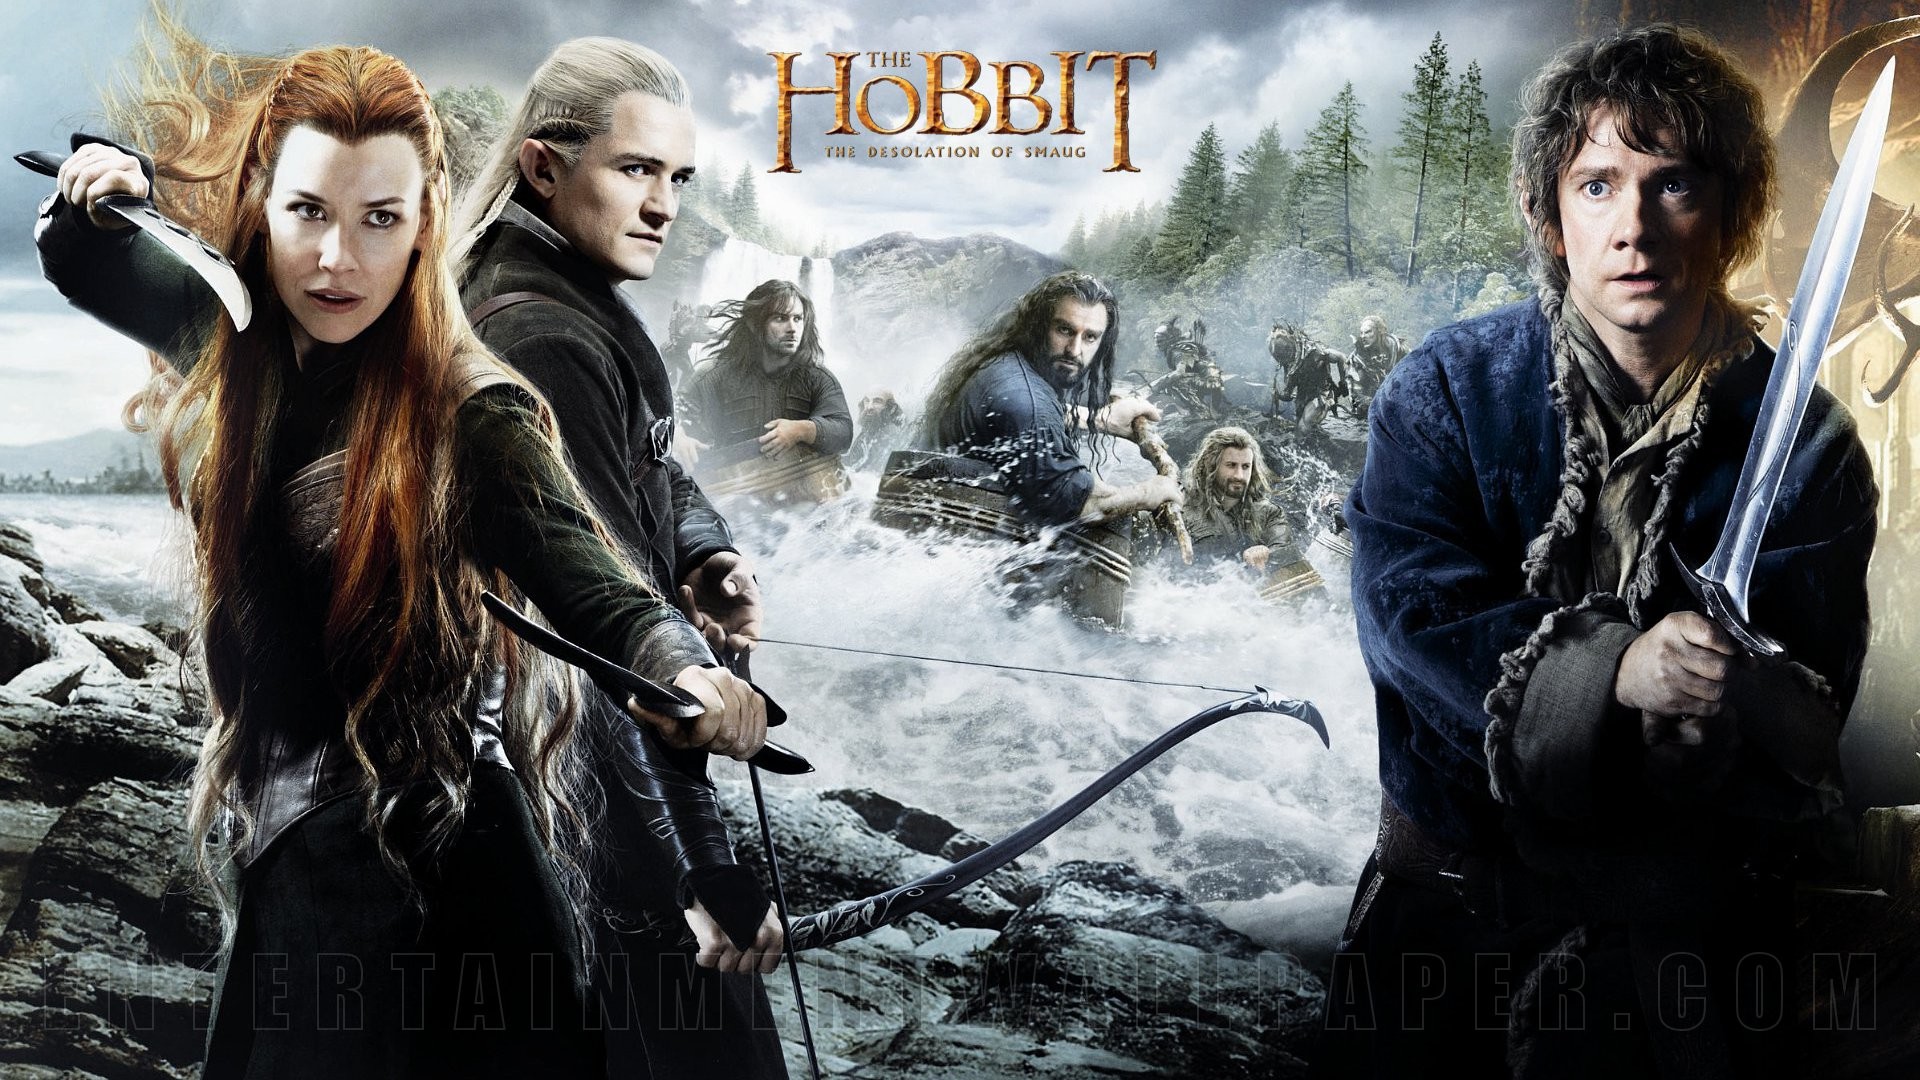 1920x1080 The Hobbit: The Desolation of Smaug Wallpaper - Original size, download now.